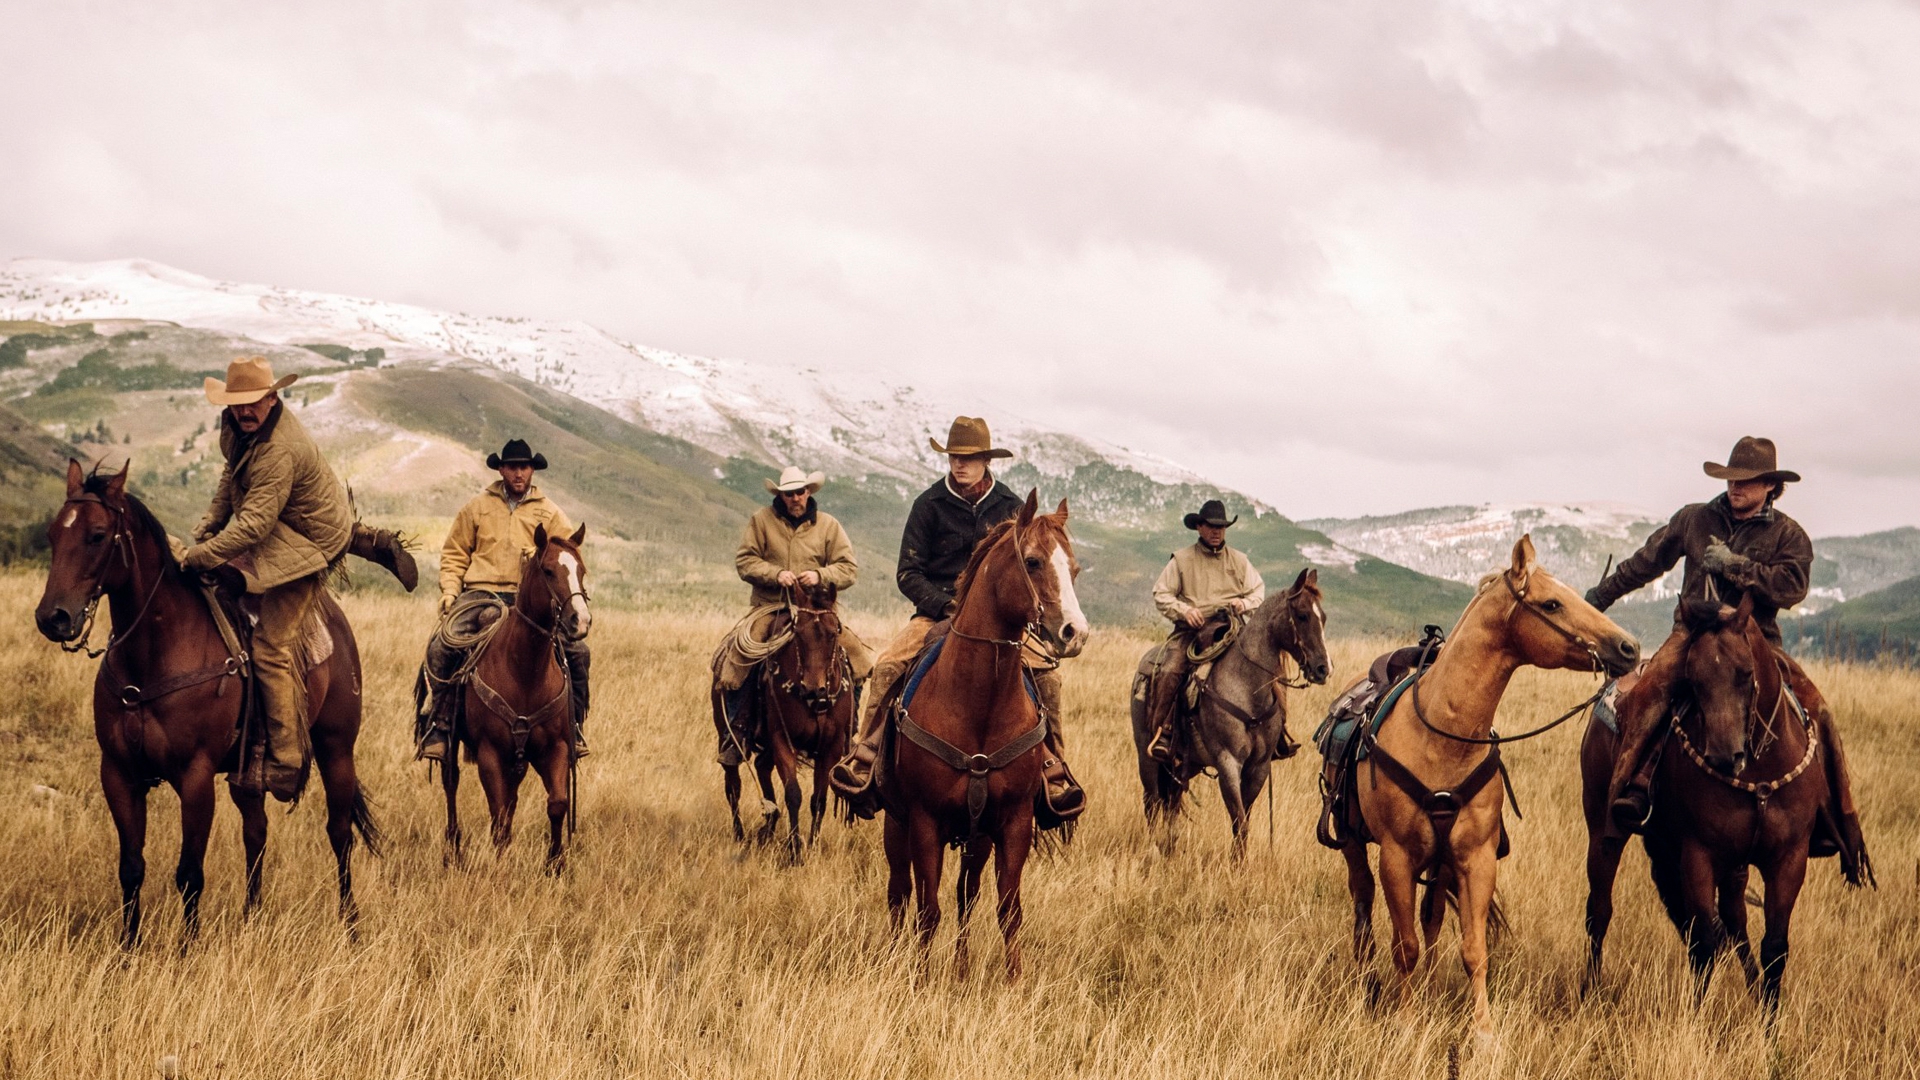 Yellowstone Tv Series Now Streaming Only On Stan